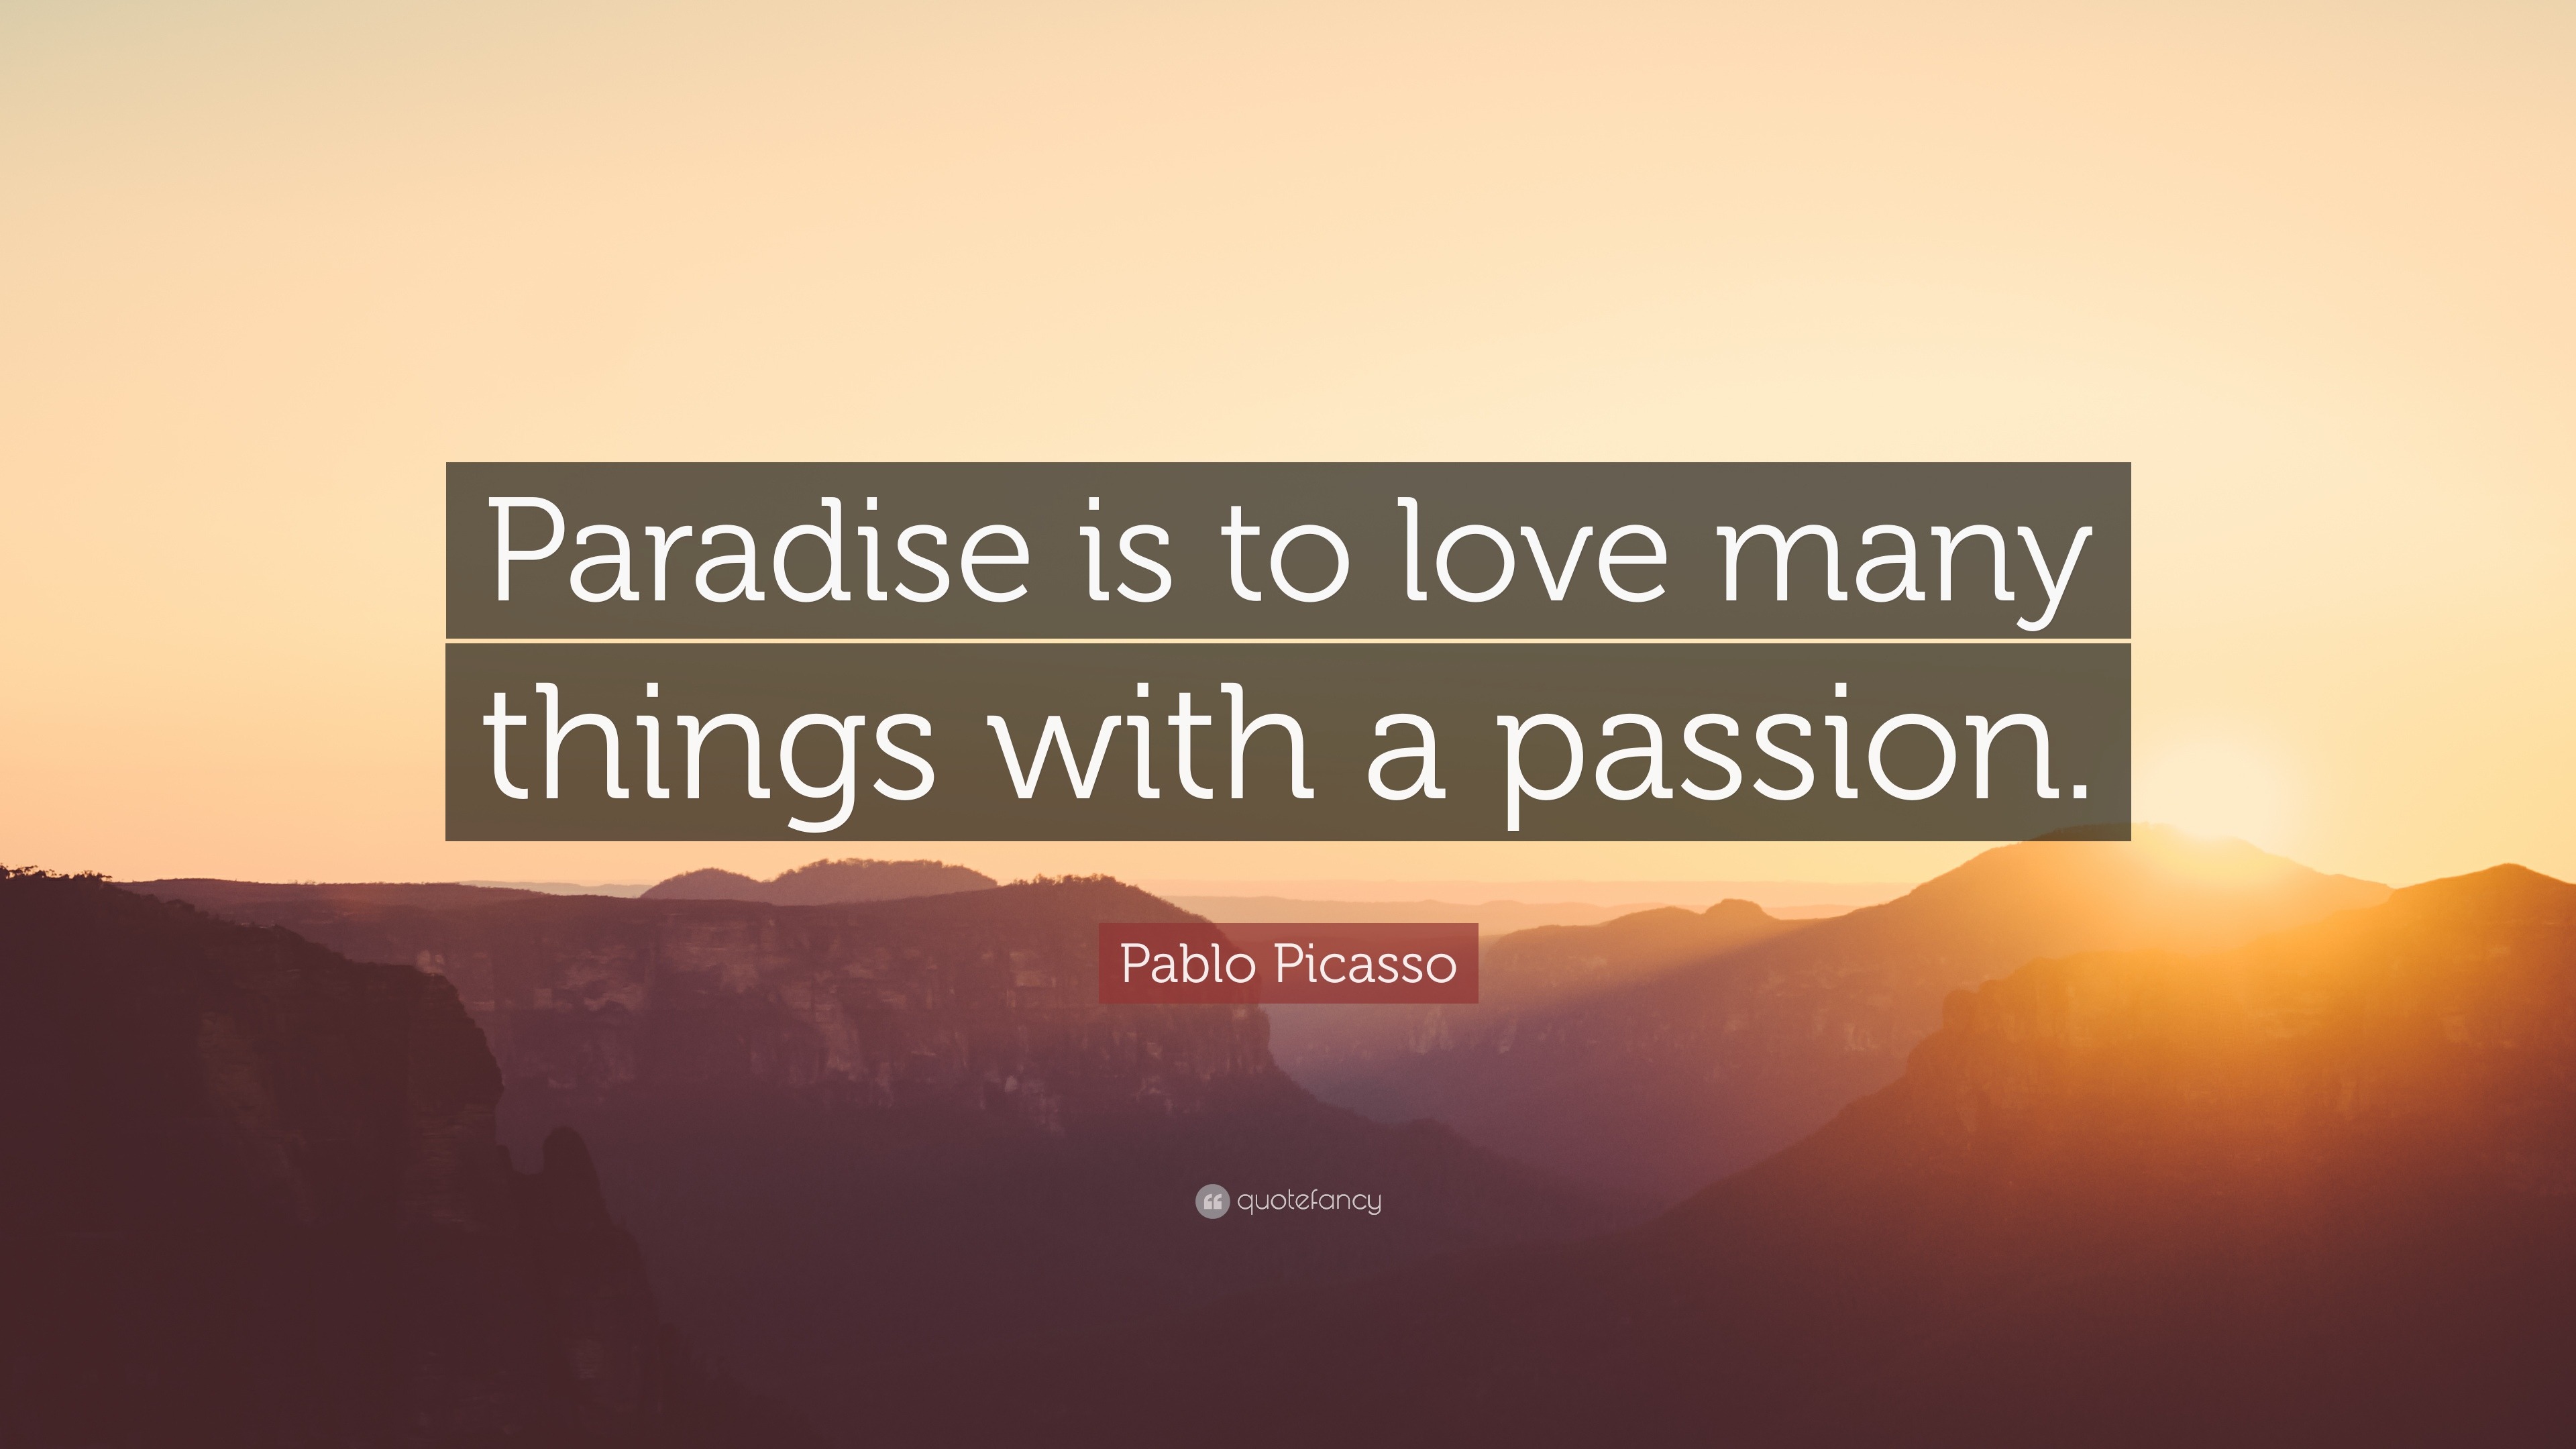 Pablo Picasso Quote “Paradise is to love many things with a passion ”